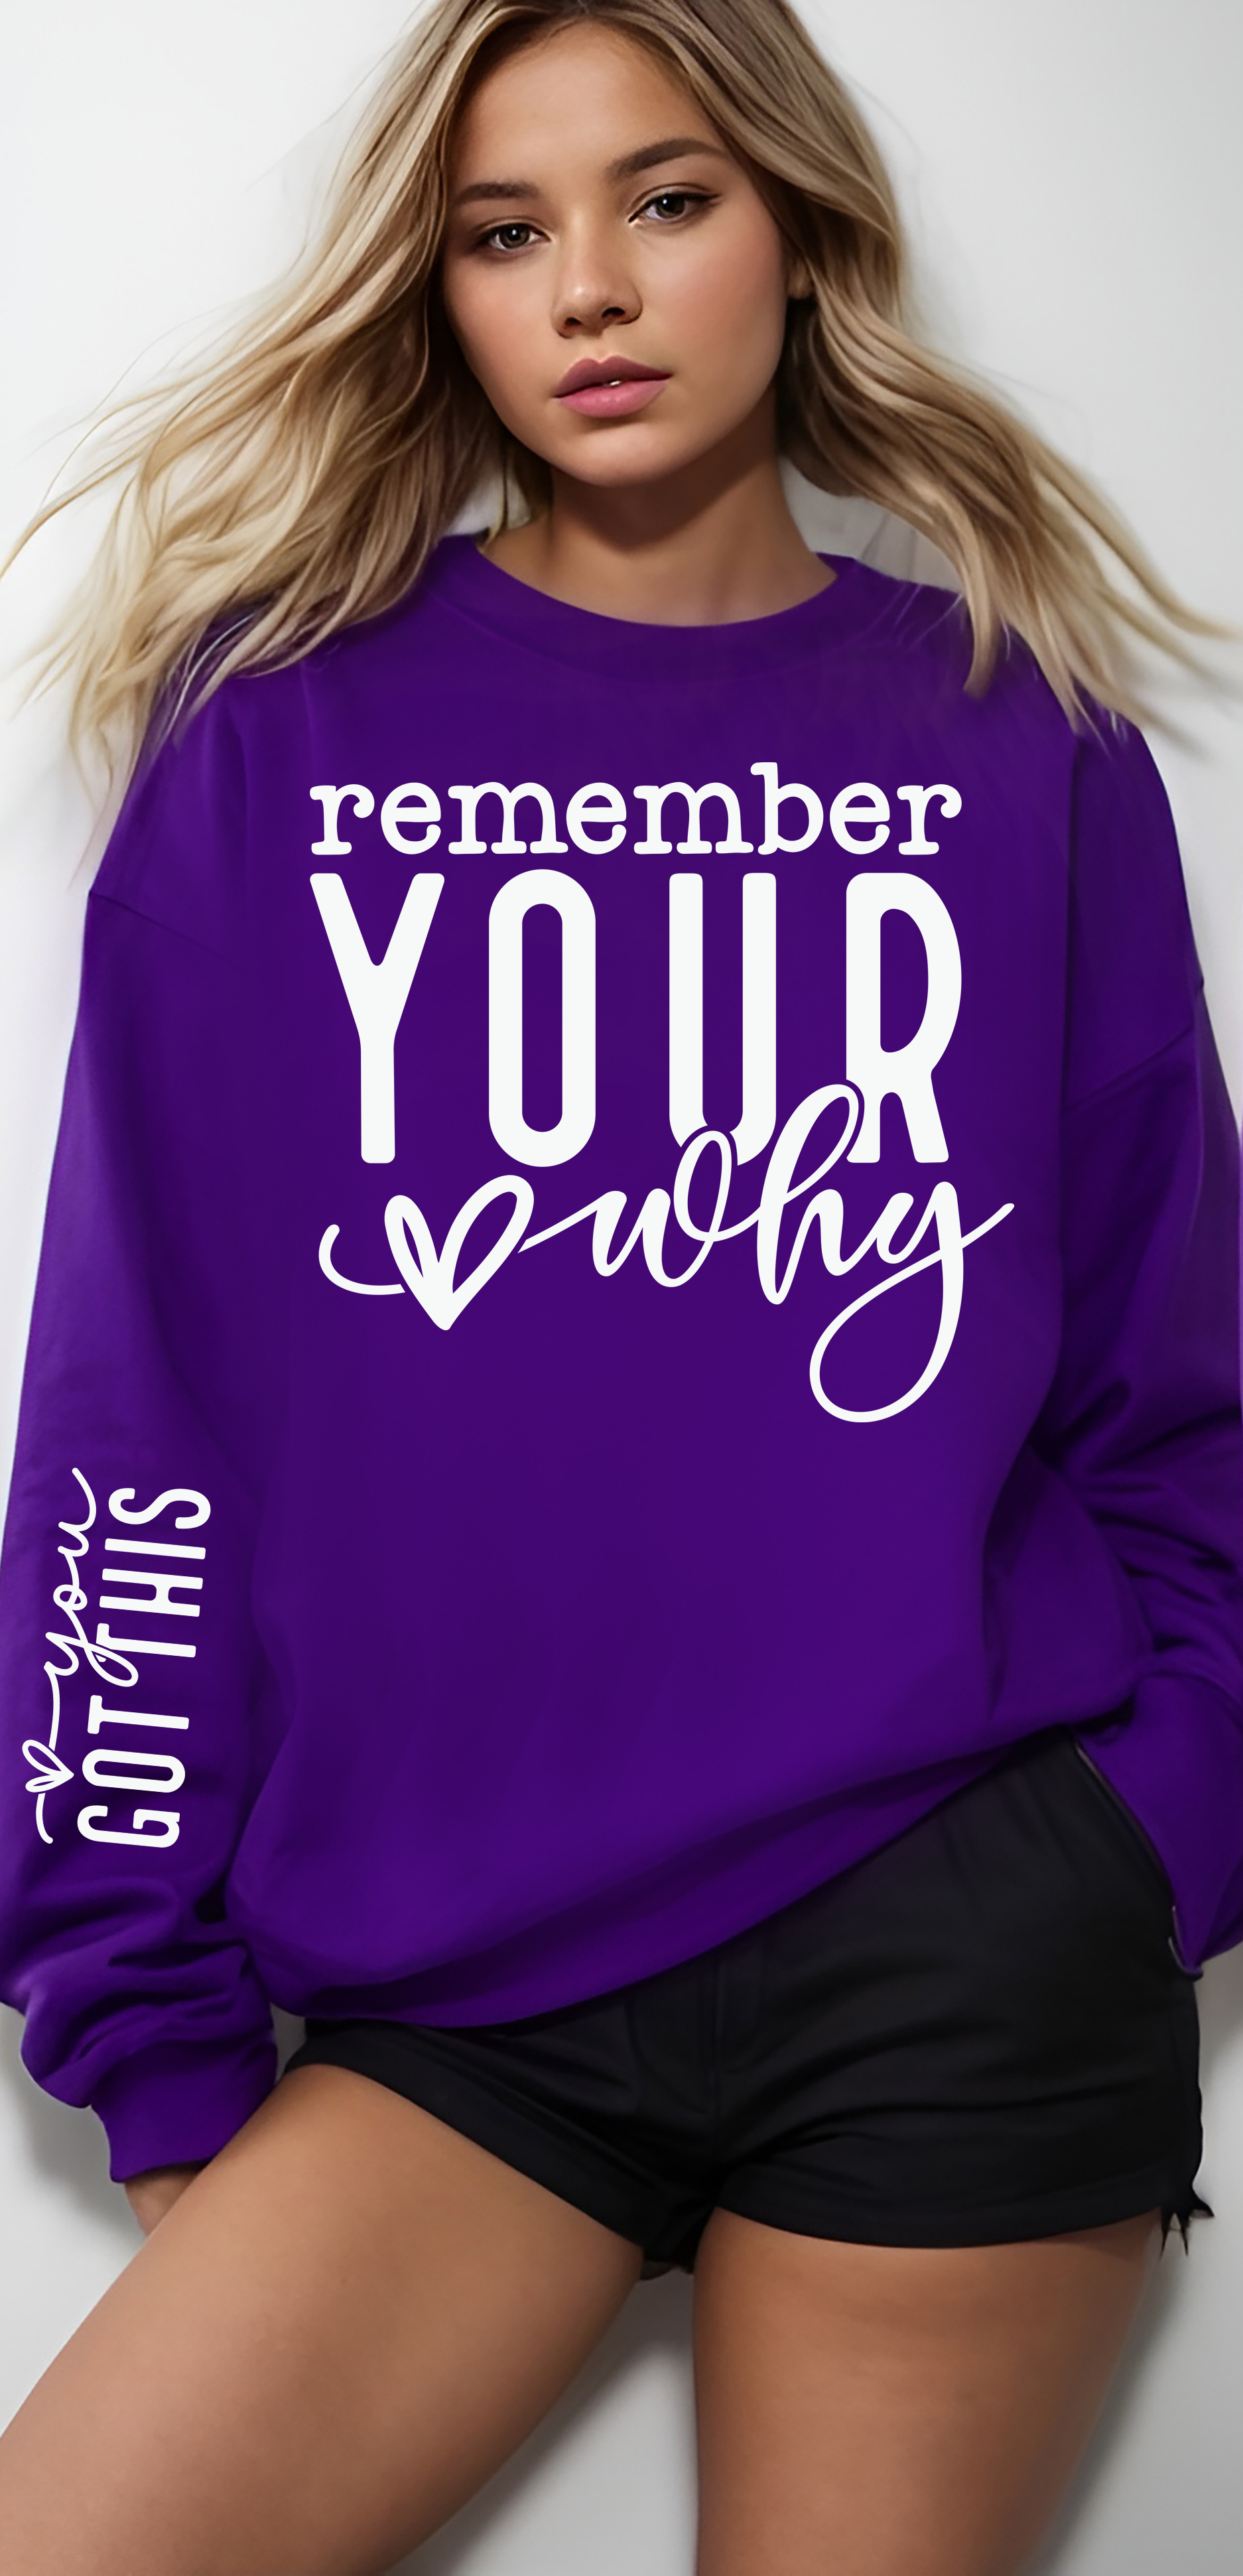 REMEMBER YOUR WHY PRINT